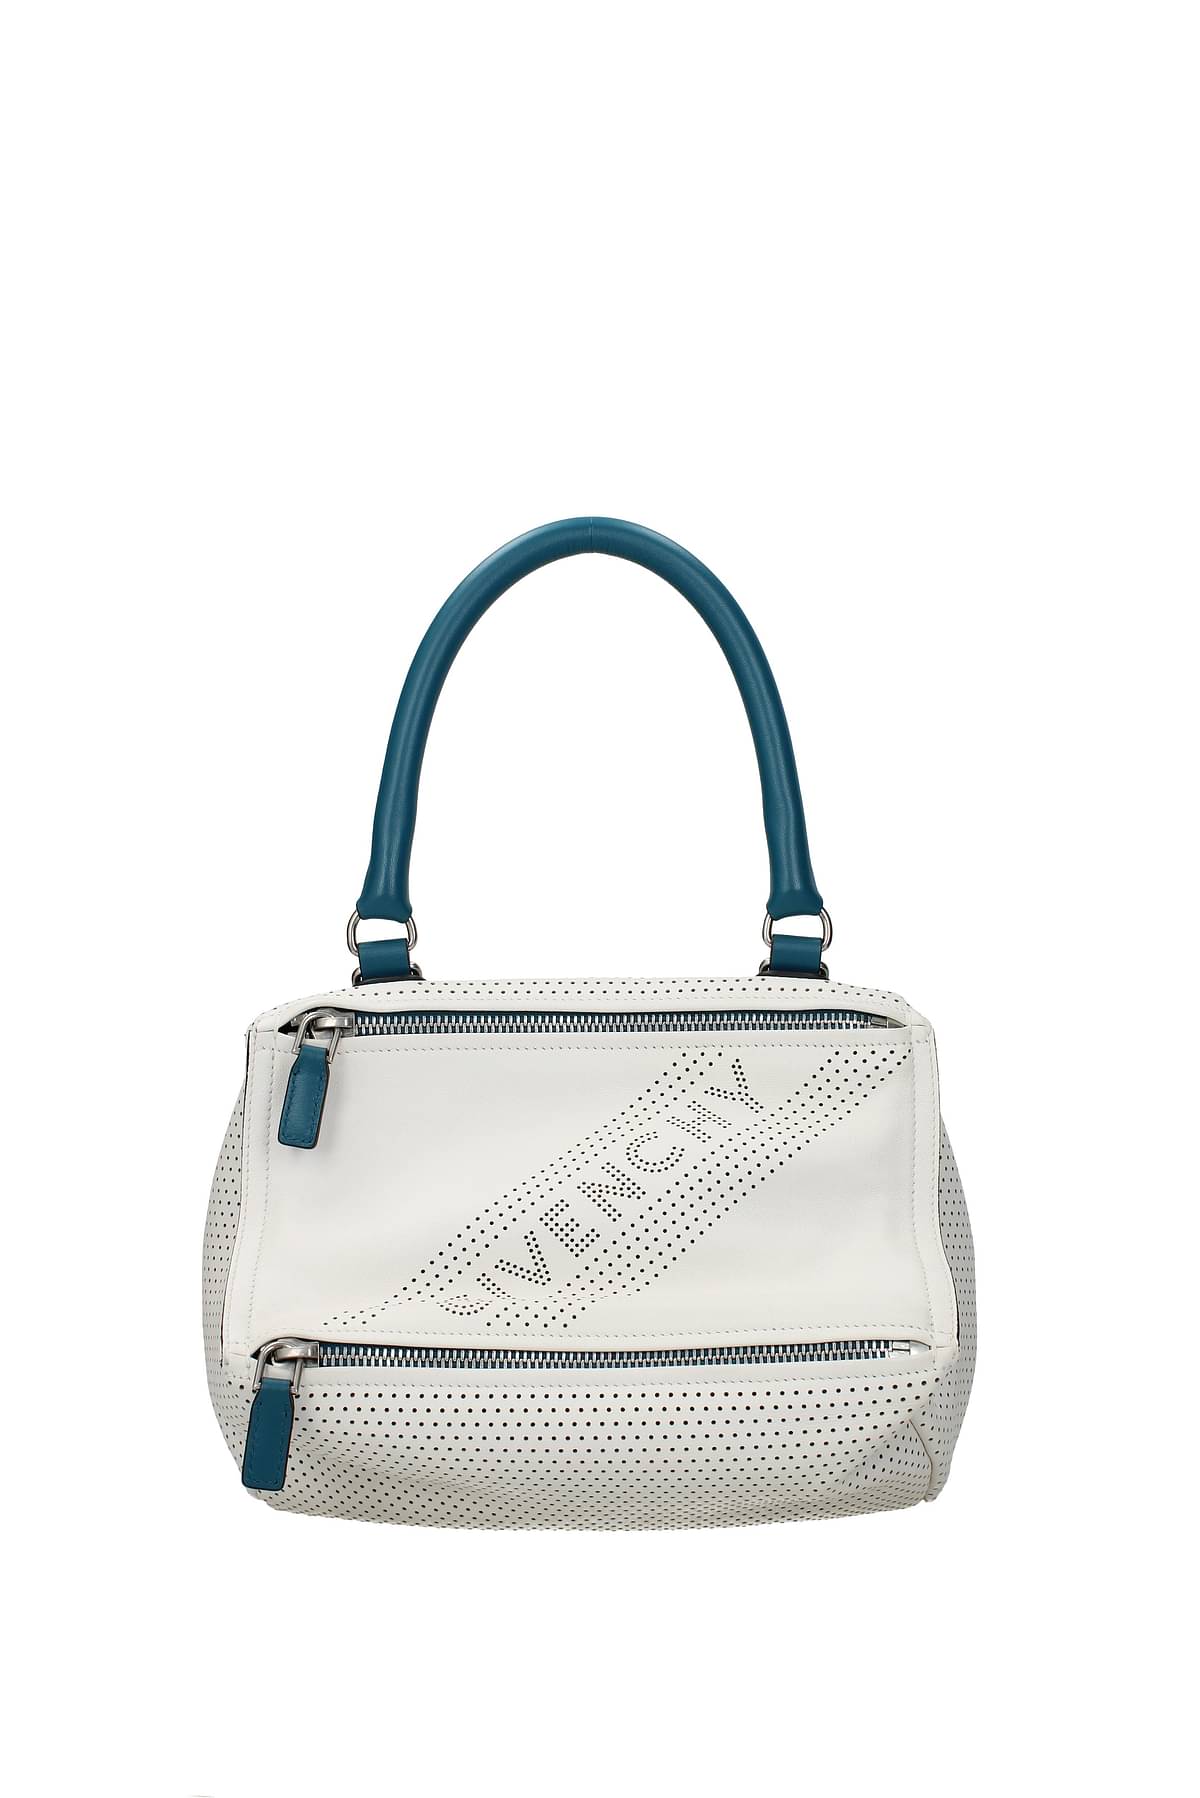 Givenchy Bags & Handbags for Women, Authenticity Guaranteed